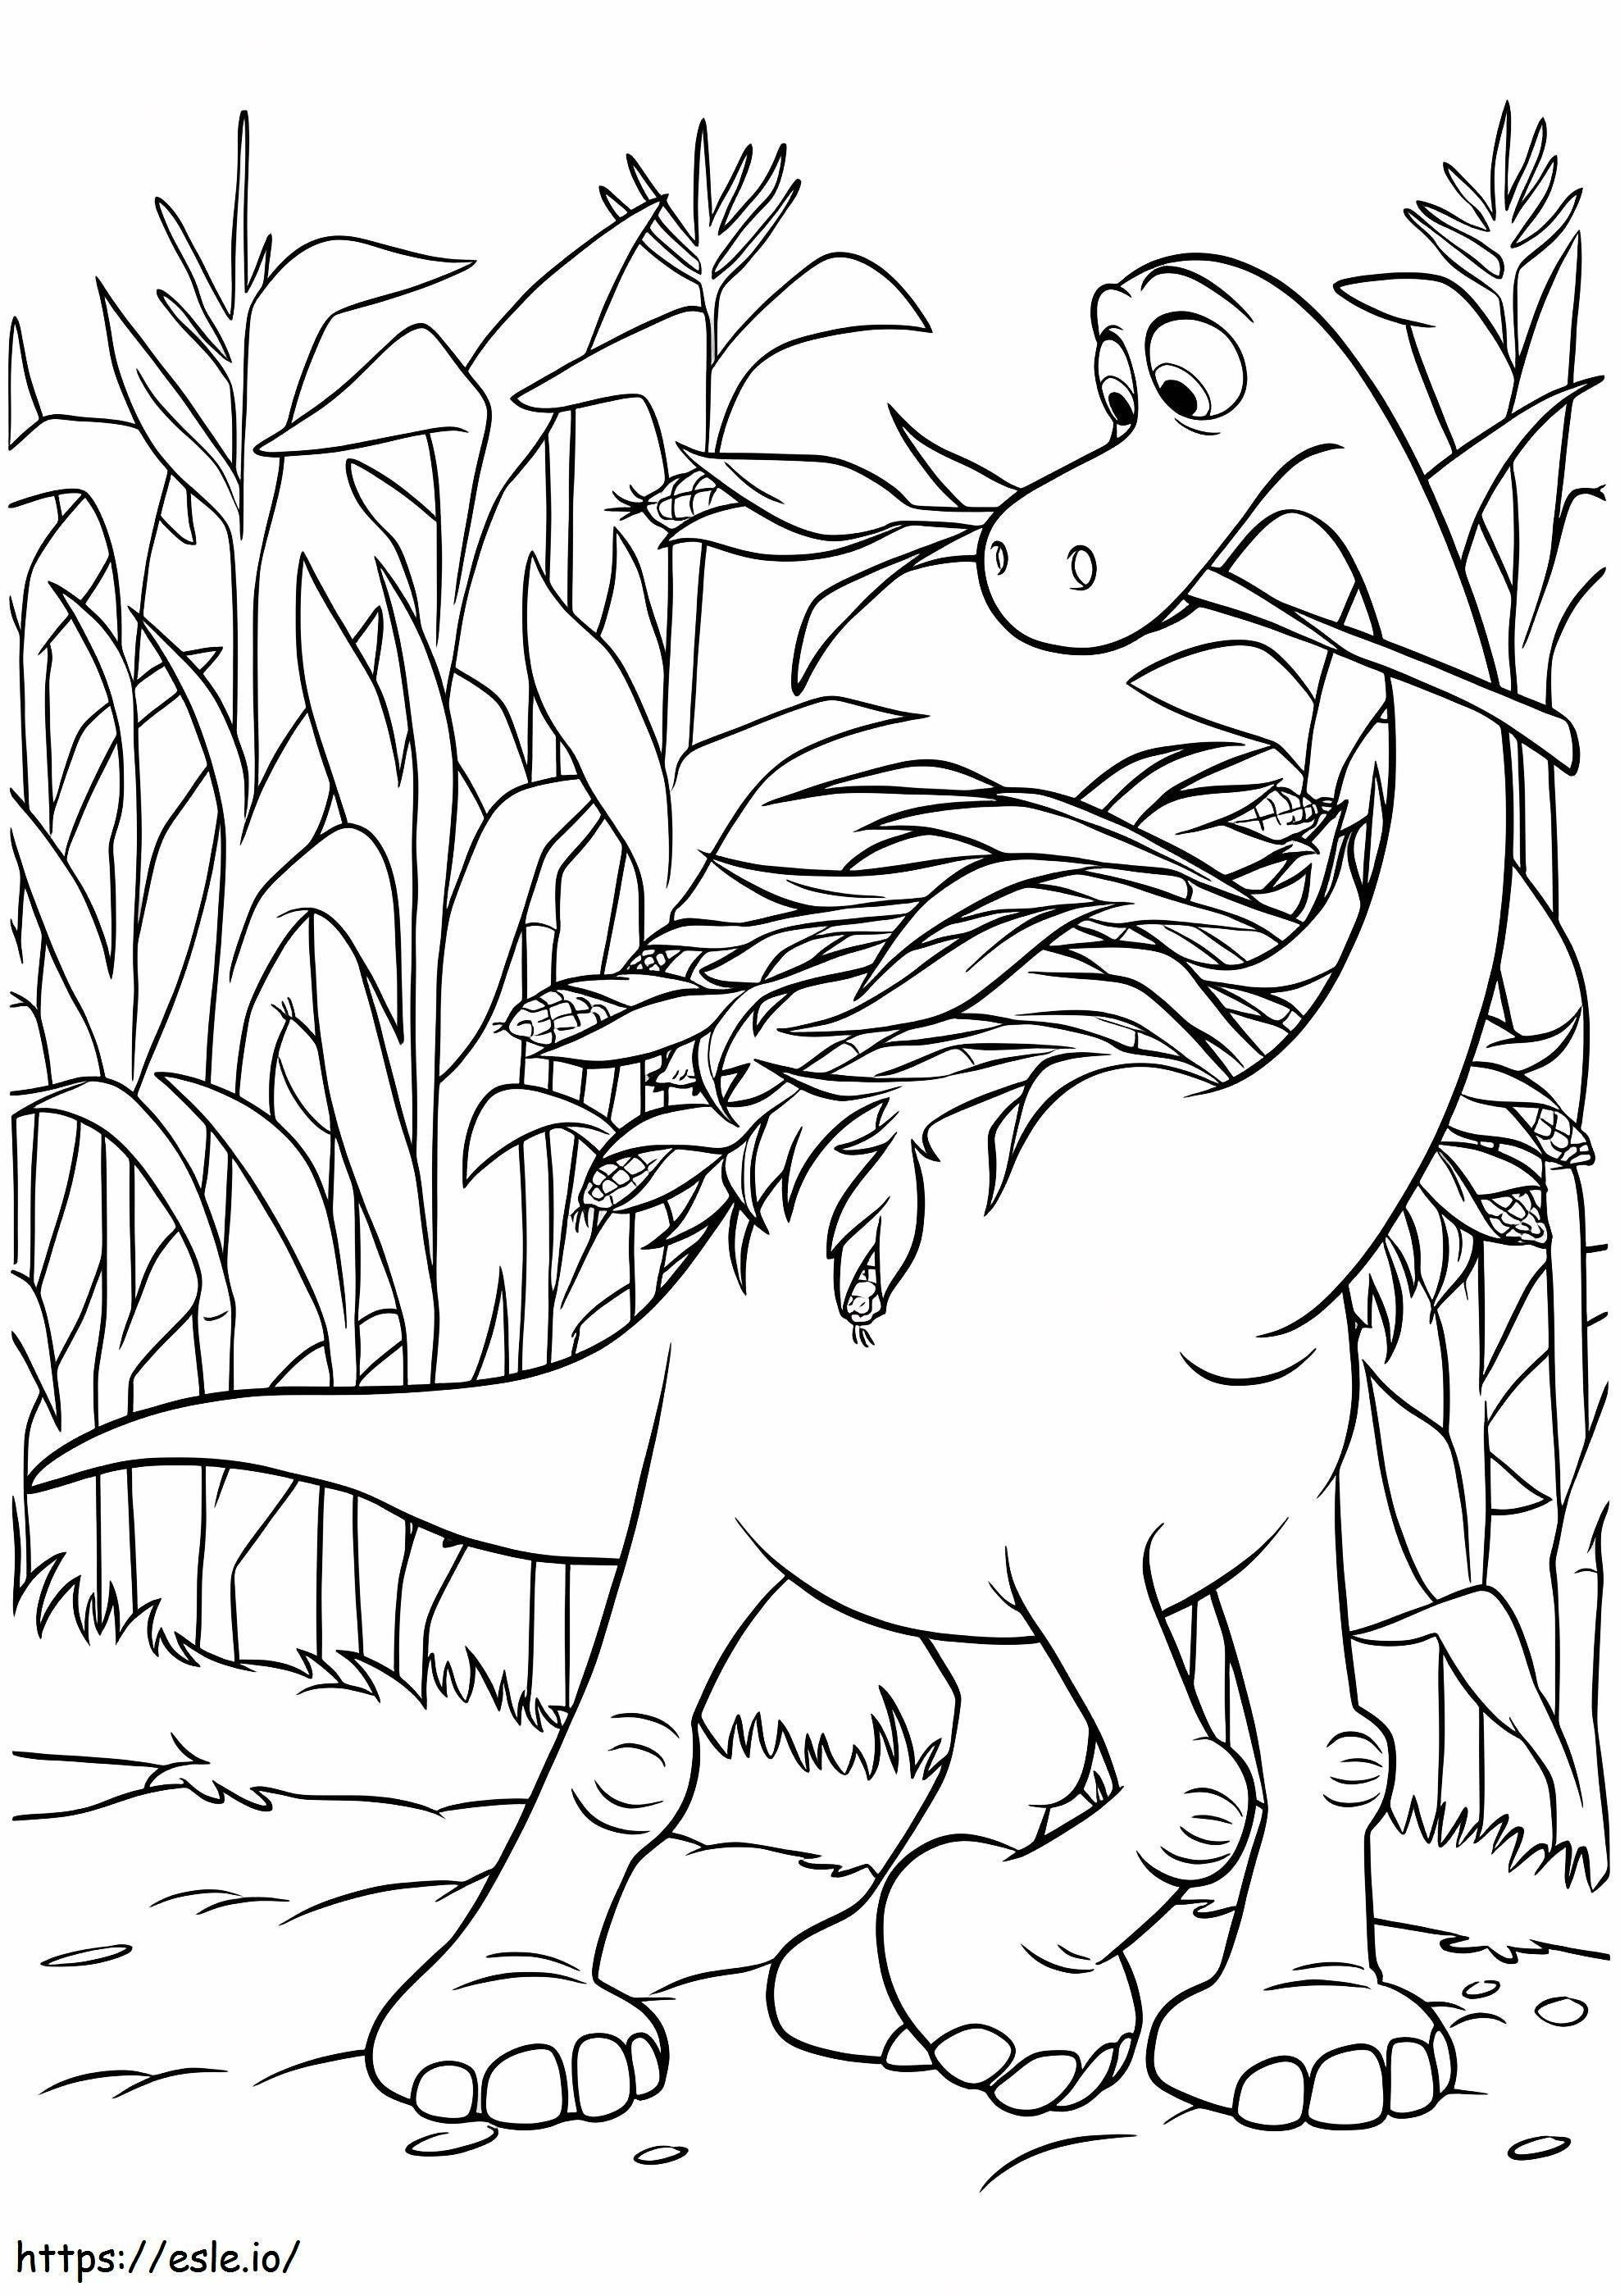 Arlo In The Cornfield coloring page